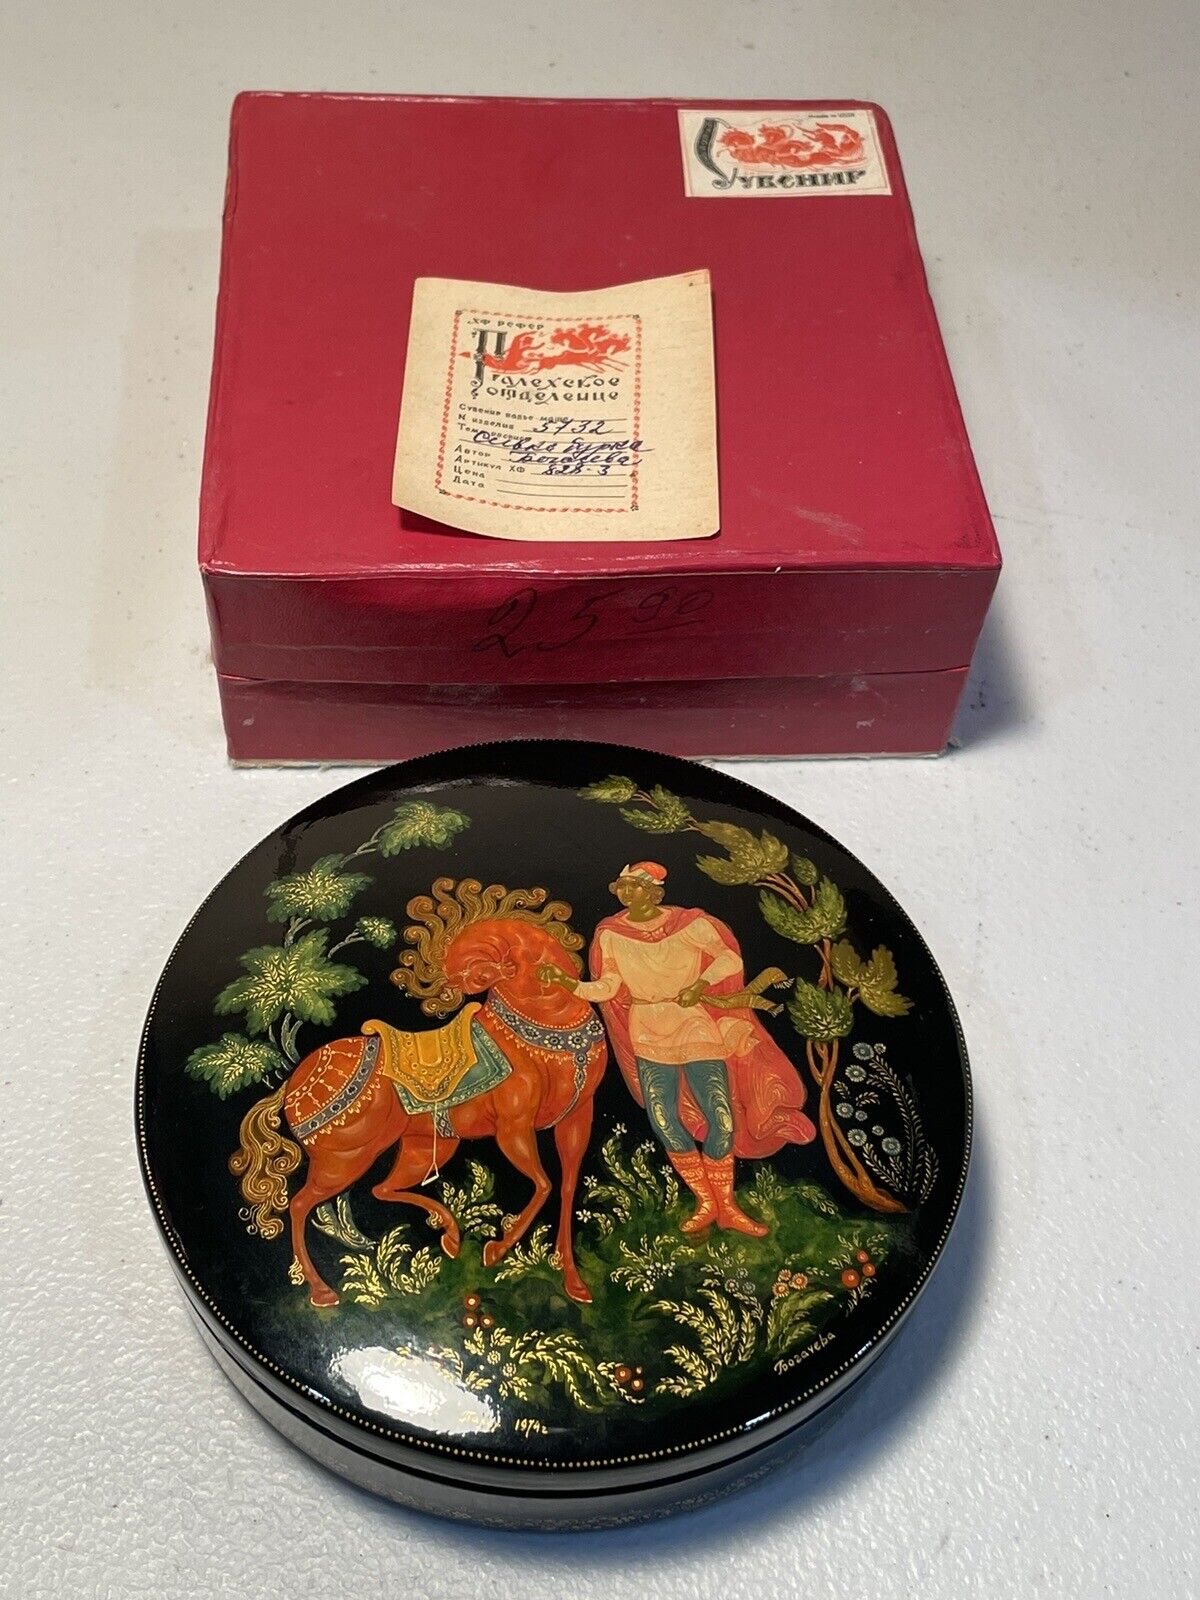 One Of A Kind Vintage 1974 Russian Palekh Lacquered Box With Original Box & Cert